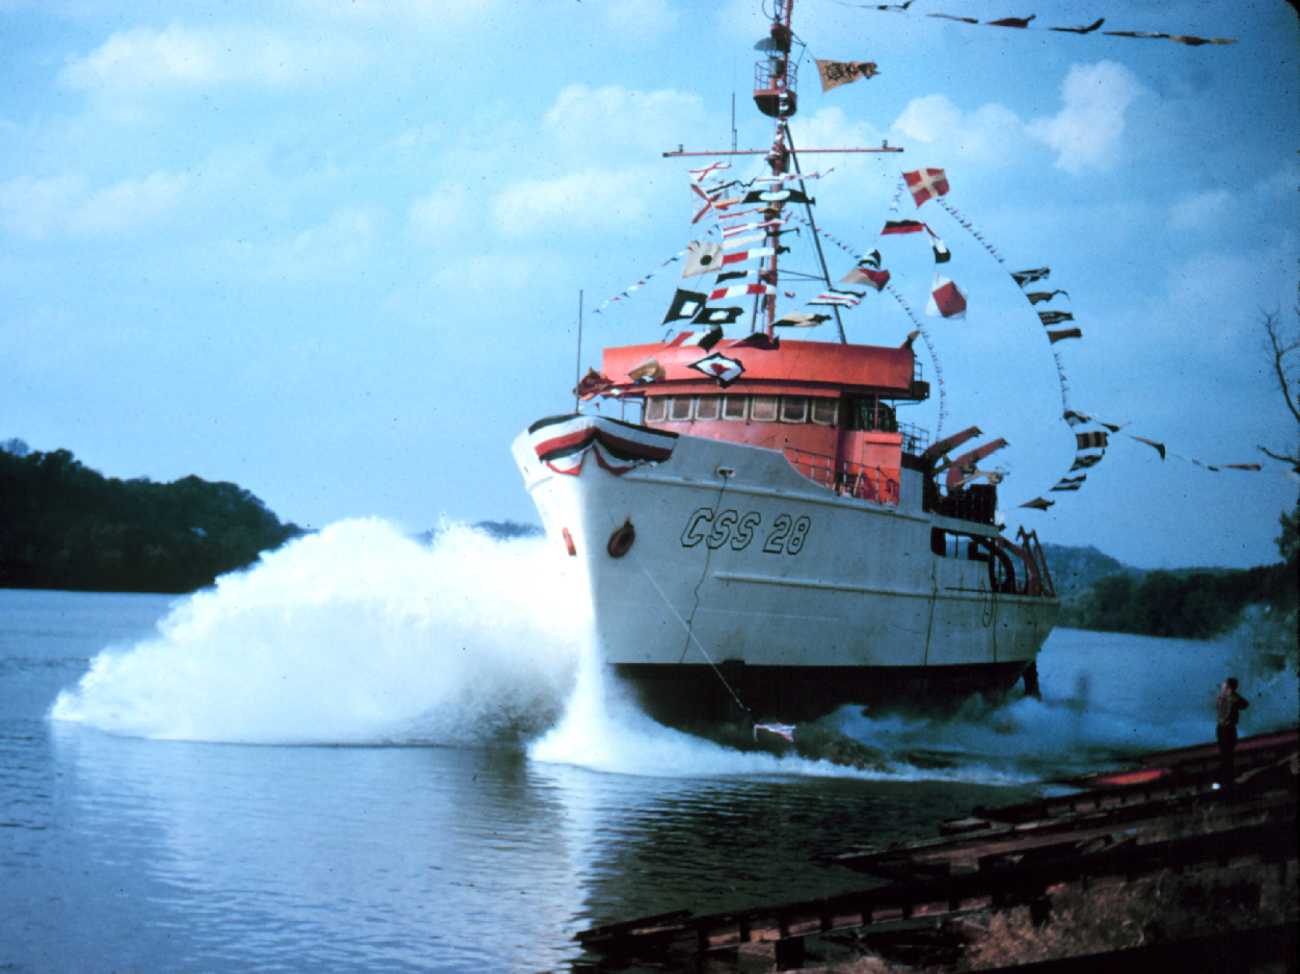 Launching ceremony for the NOAA Ship PIERCE